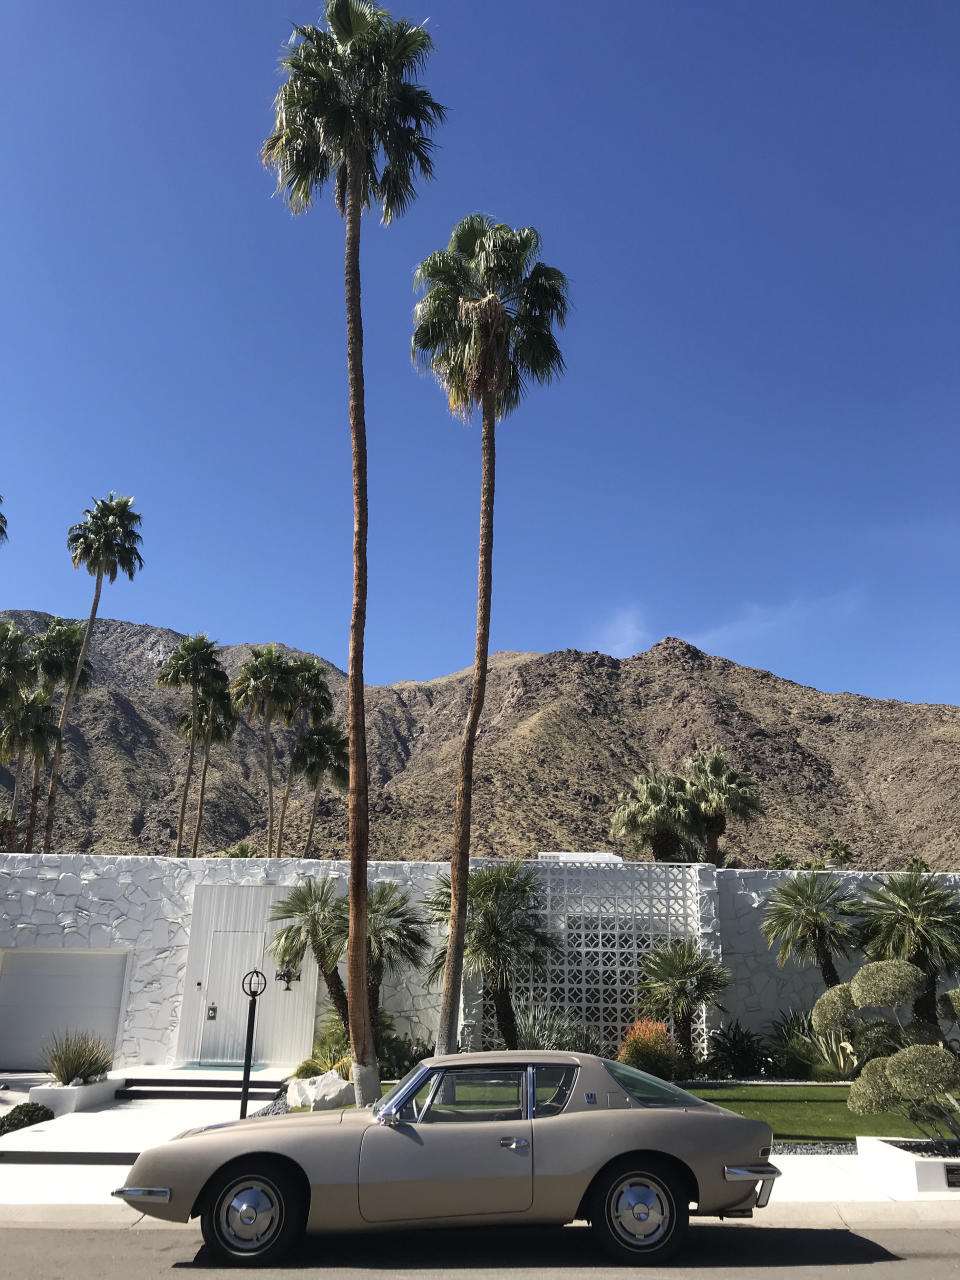 The Morse Home designed by architect Hal Levitt and featuring an Avanti Studebaker in Palm Springs, California on February 12, 2020.